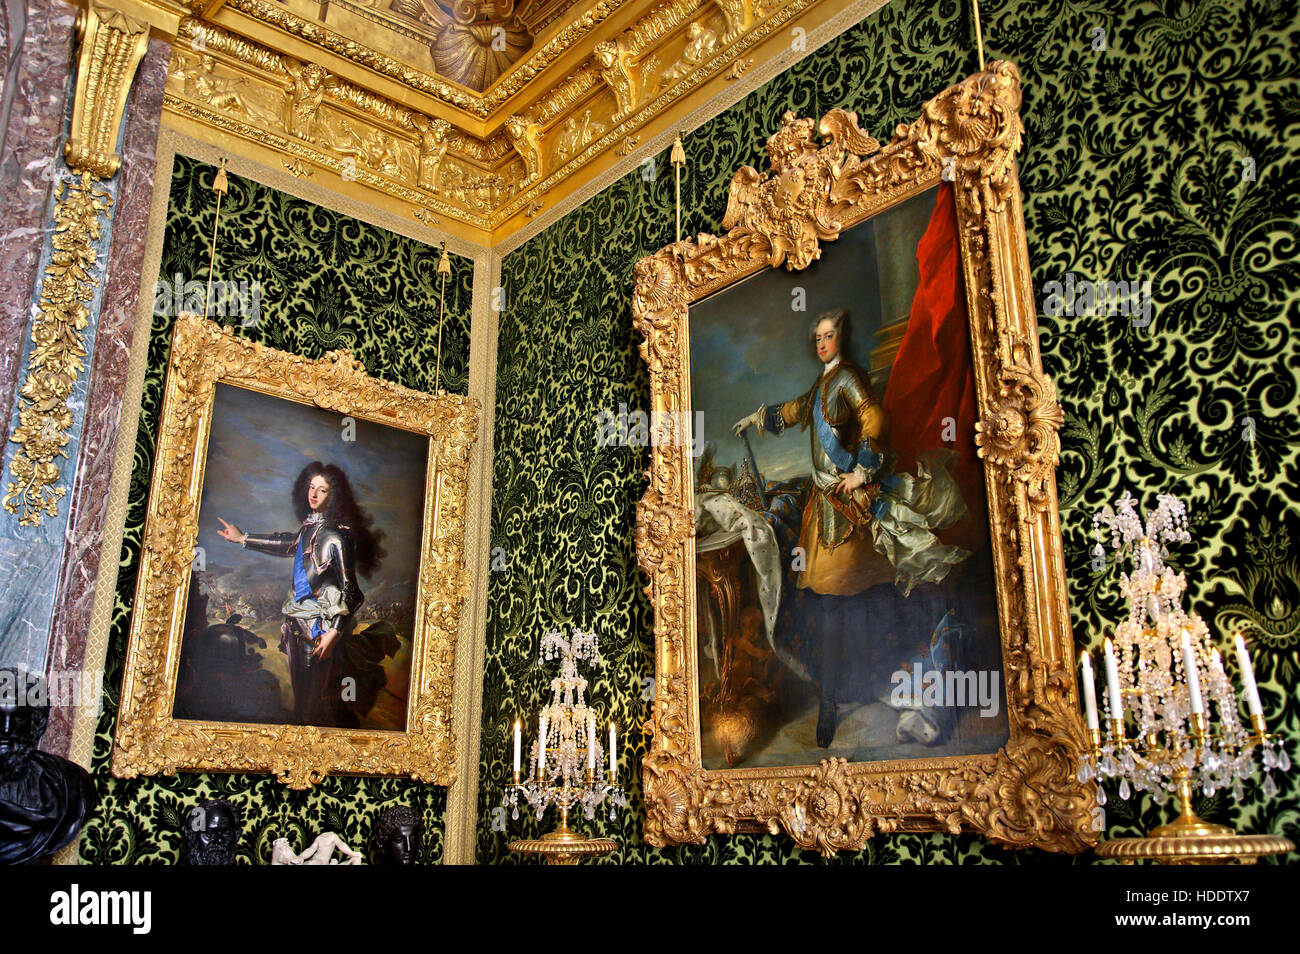 In the 'Abundance Salon' (salon de l'Abondance) in the Grand Appartements of the Palace of Versailles, France. Stock Photo